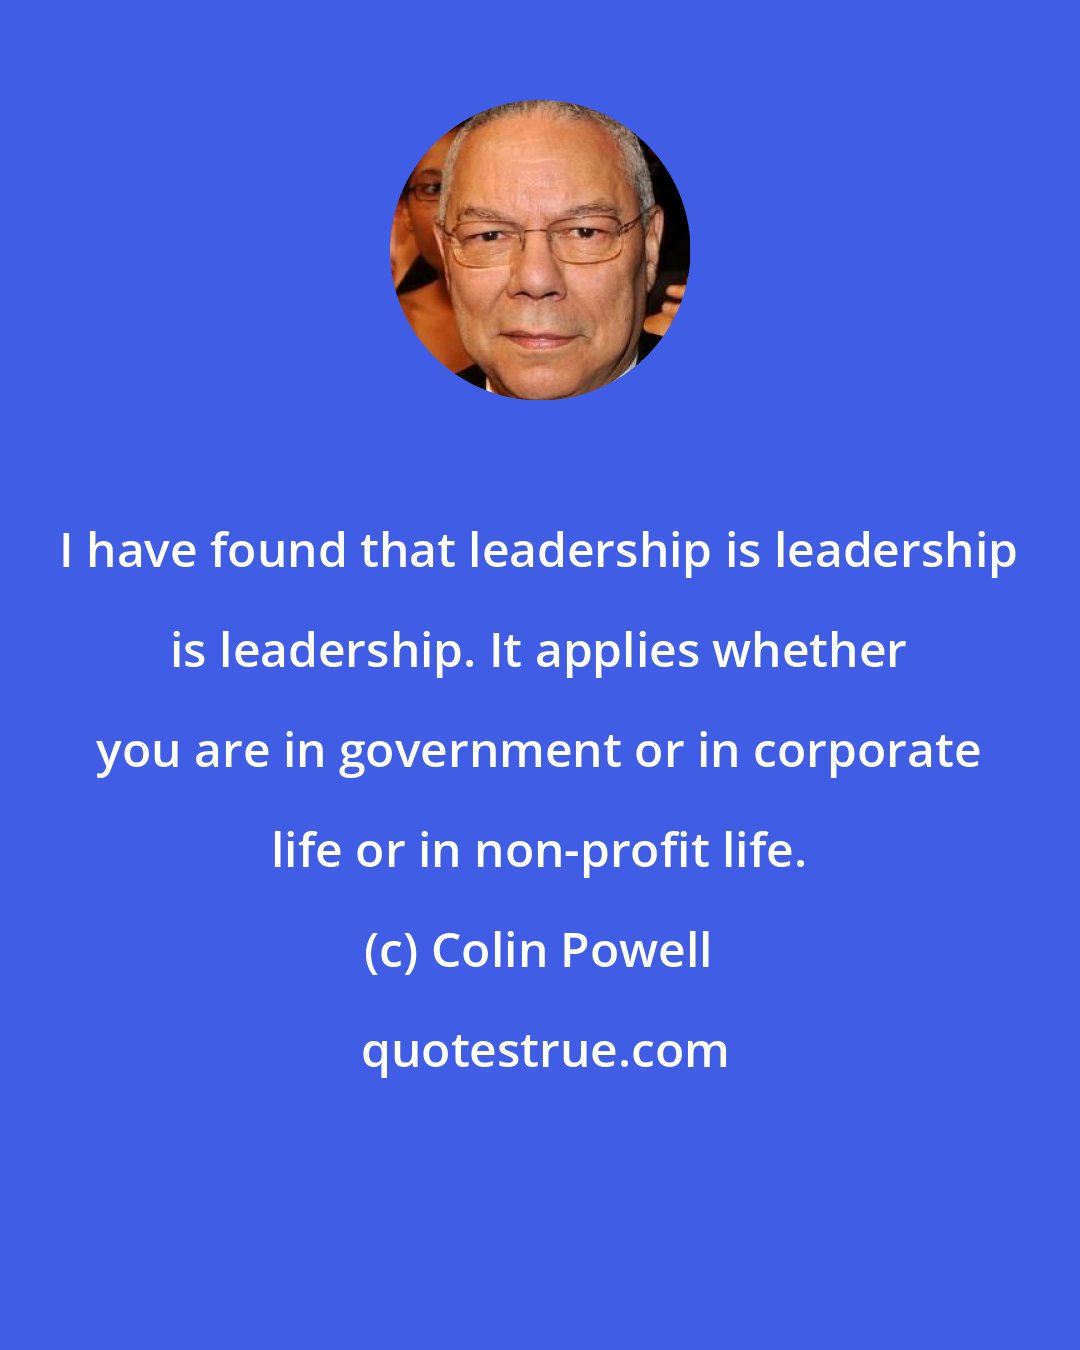 Colin Powell: I have found that leadership is leadership is leadership. It applies whether you are in government or in corporate life or in non-profit life.